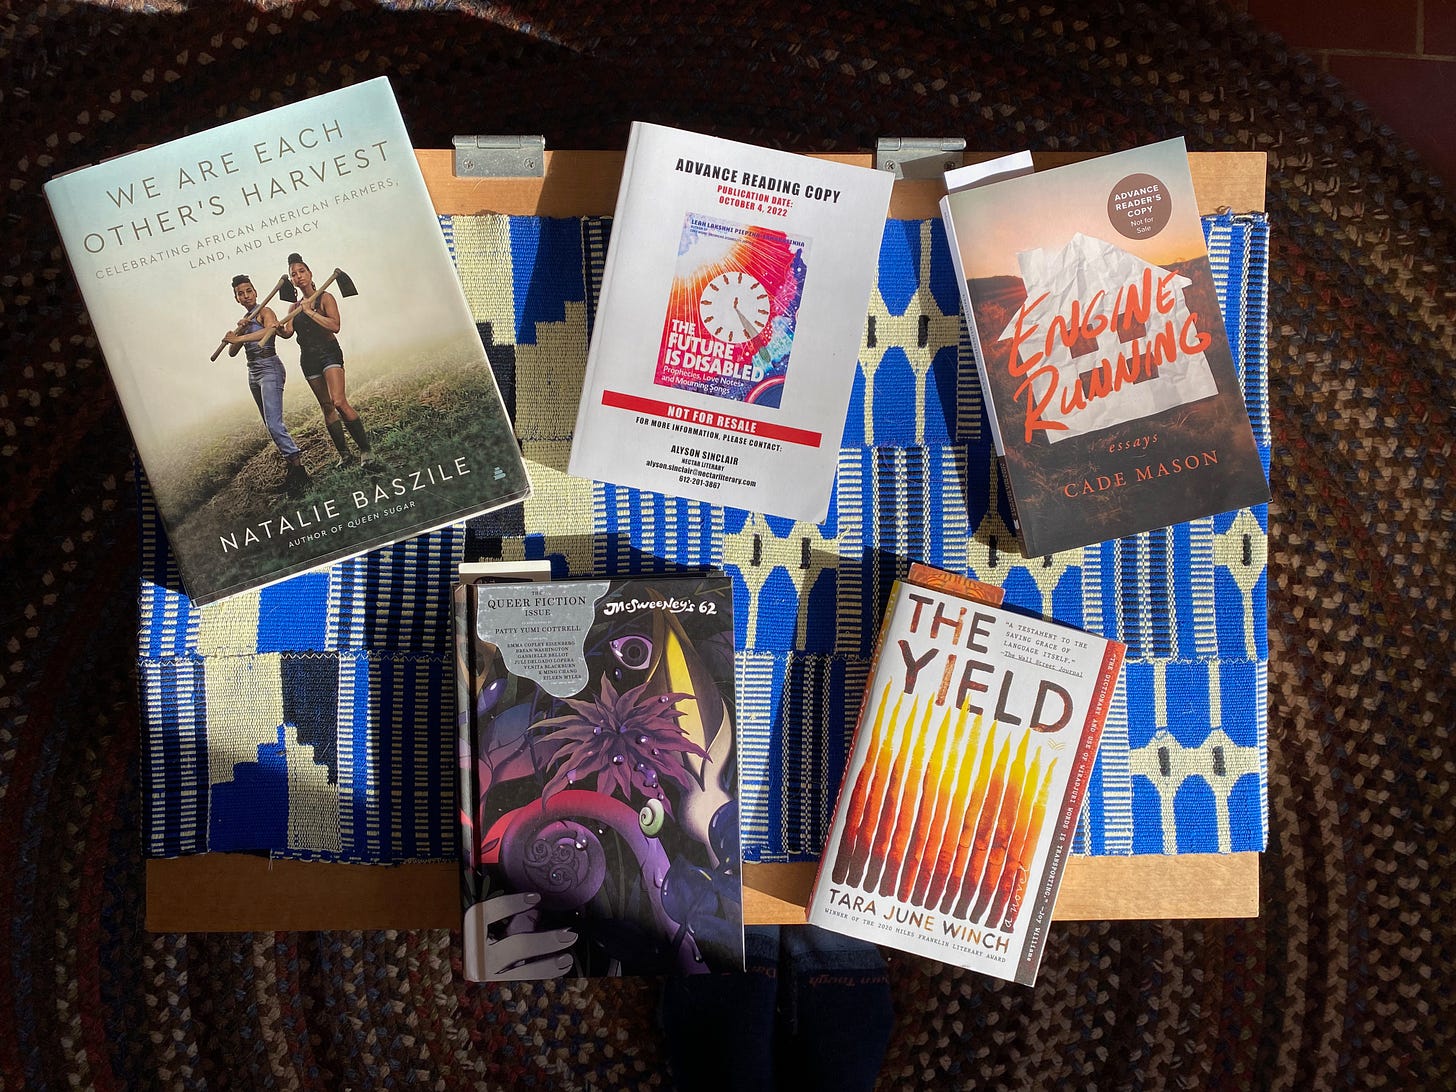 Six books arranged face-up on a coffee table covered in a blue cloth: We Are Each Other’s Harvest, The Future is Disabled, Engine Running, The McSweeney’s Queer Fiction Issue, and The Yield.